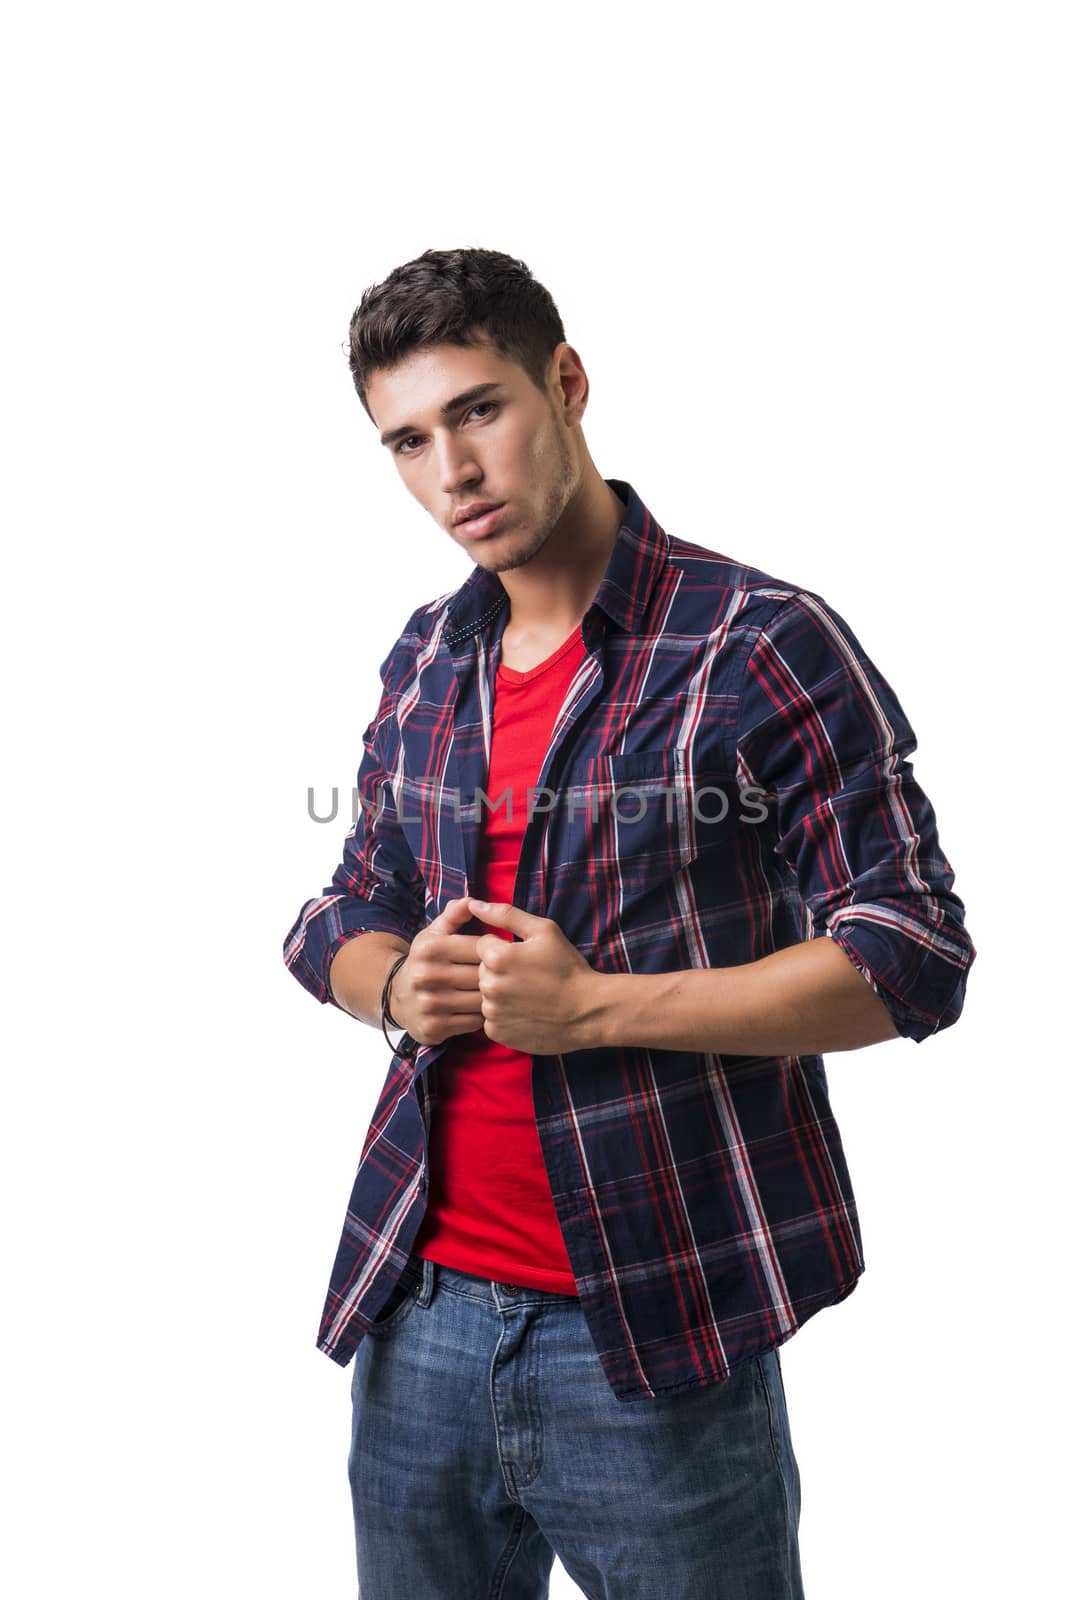 Serious looking young man wearing red t-shirt and casual shirt looking at camera isolated in white background